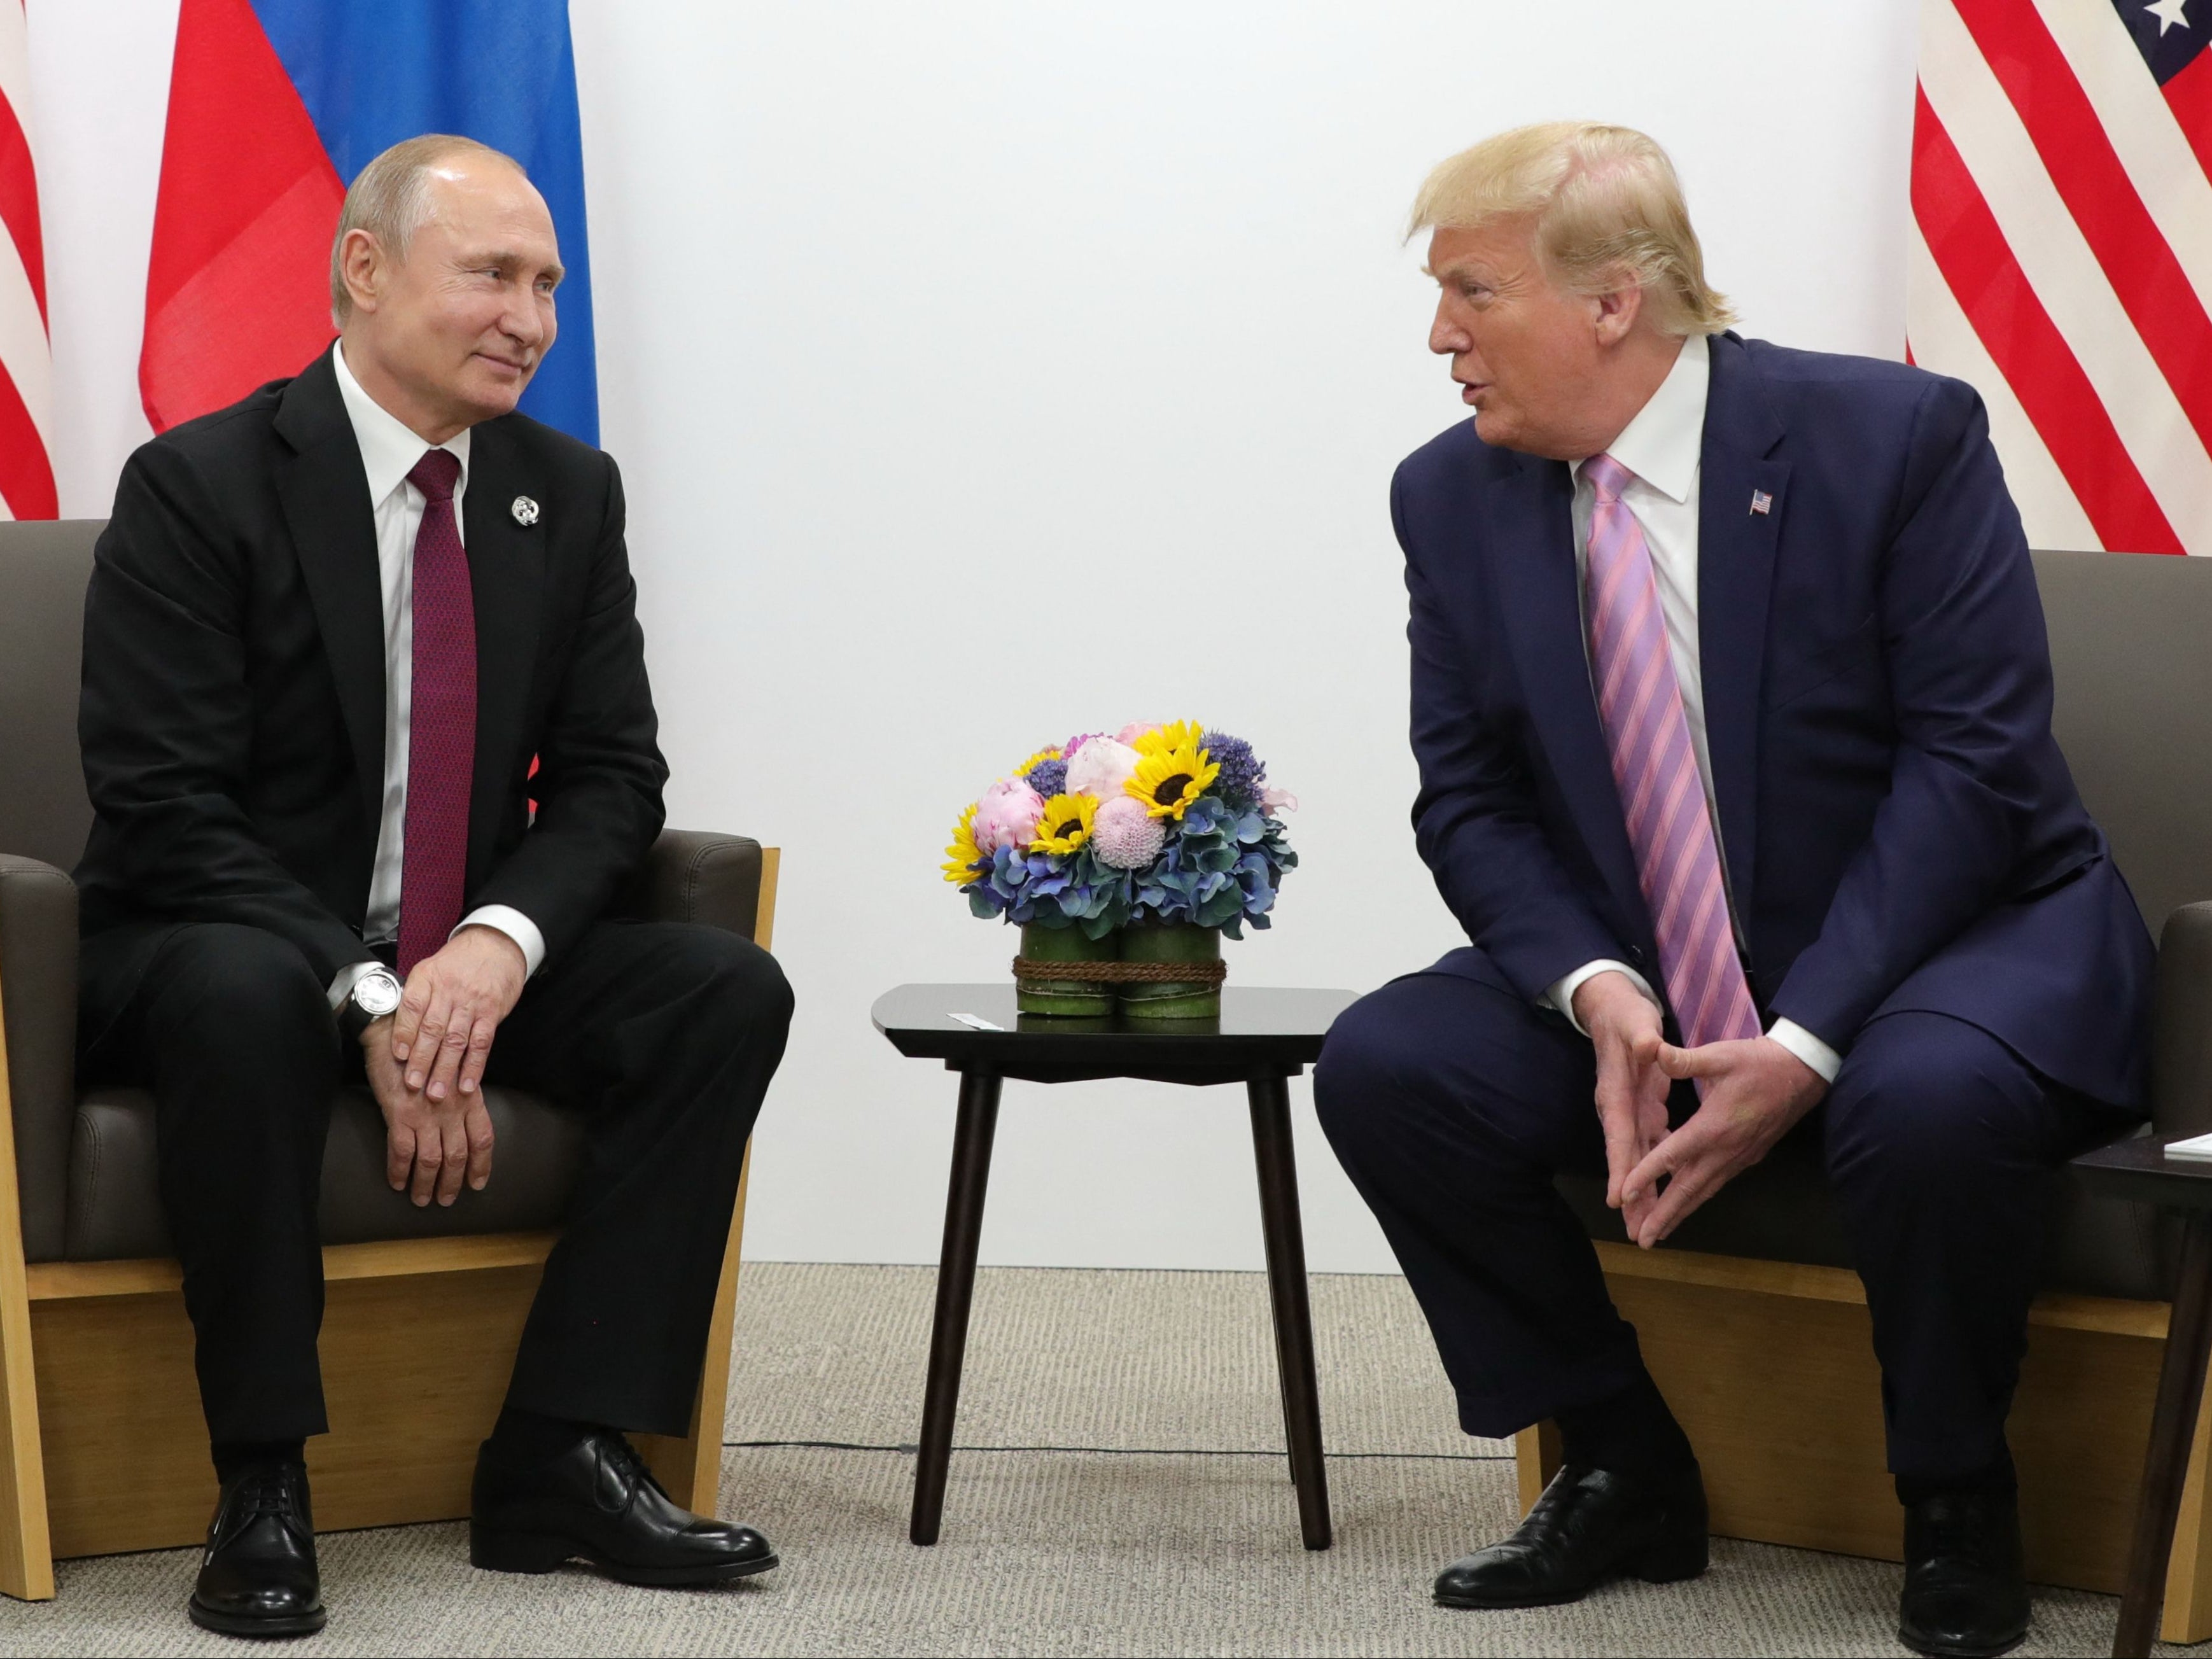 Russian President Vladimir Putin and US President Donald Trump hold a meeting on the sidelines of the G20 summit in Osaka on June 28, 2019